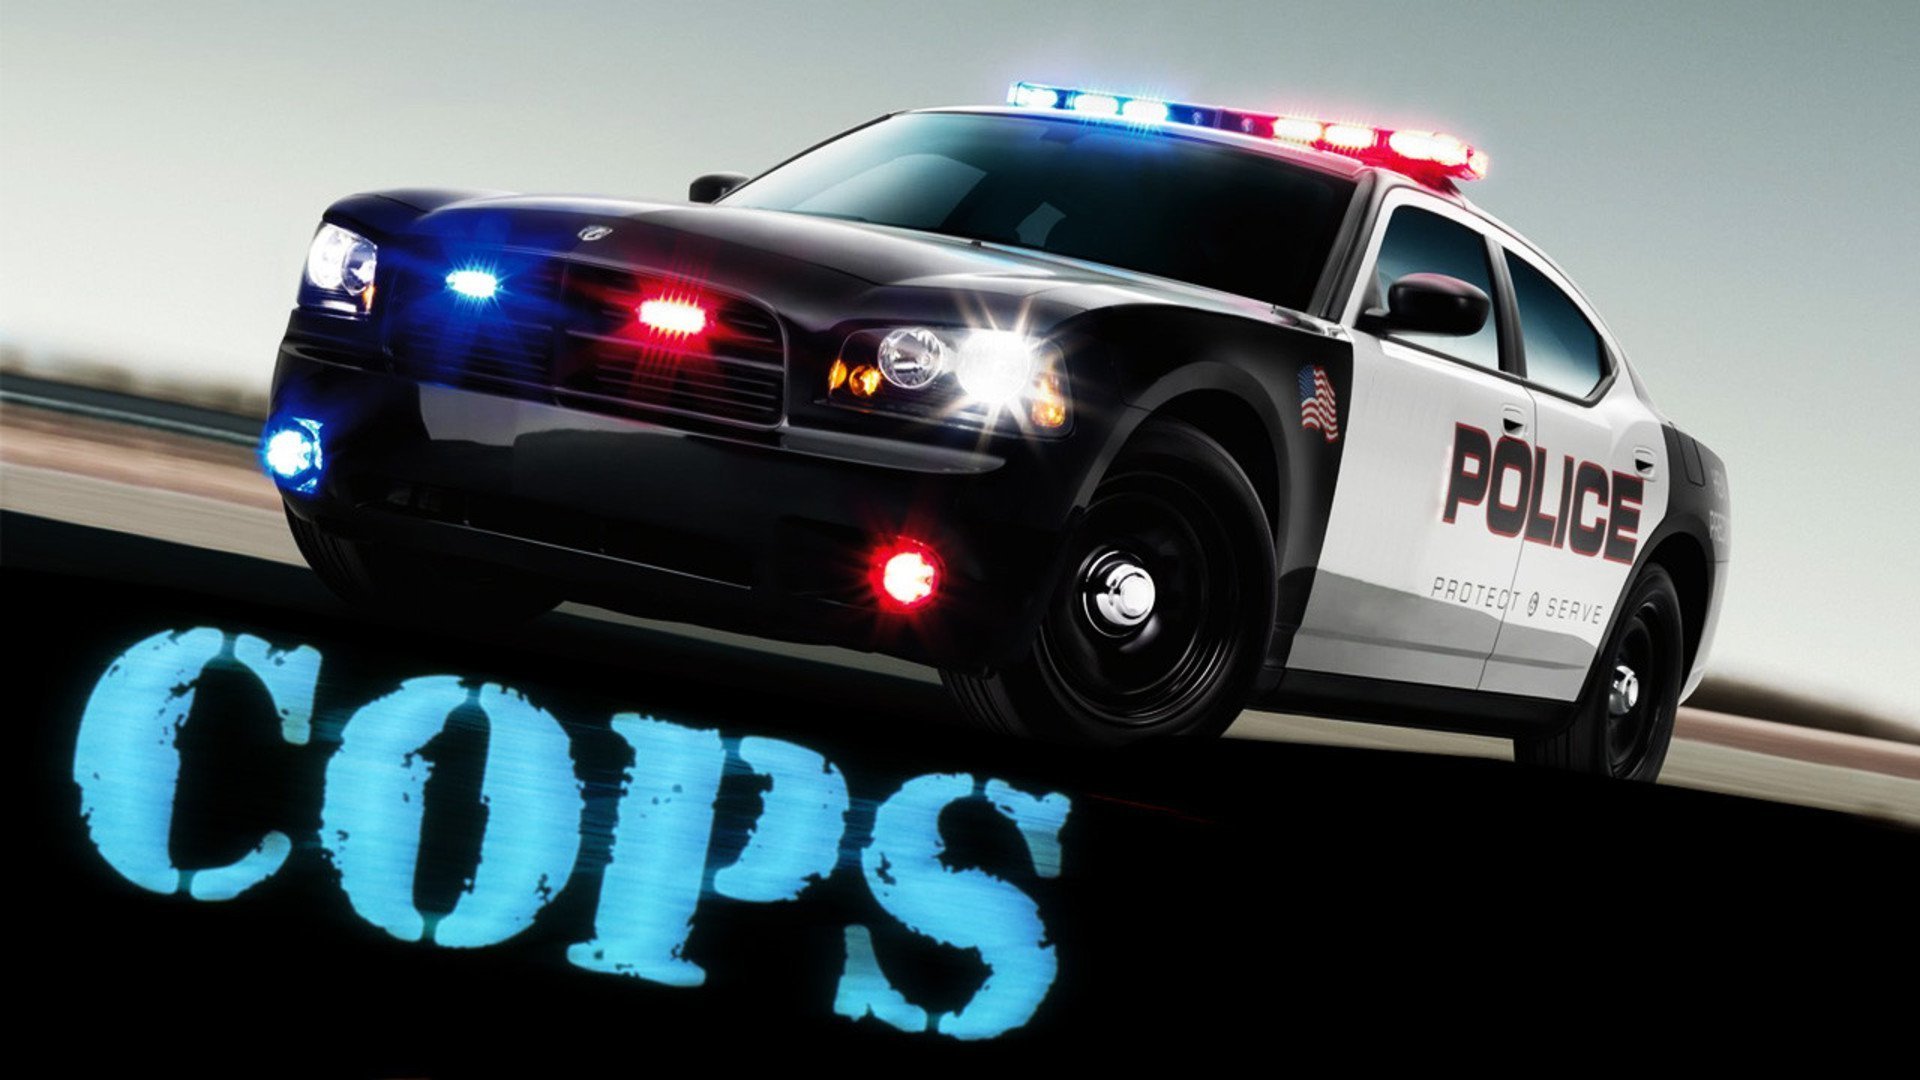 Cops Hd Wallpaper Background Image 1920x1080 Id 804725 Wallpaper Abyss